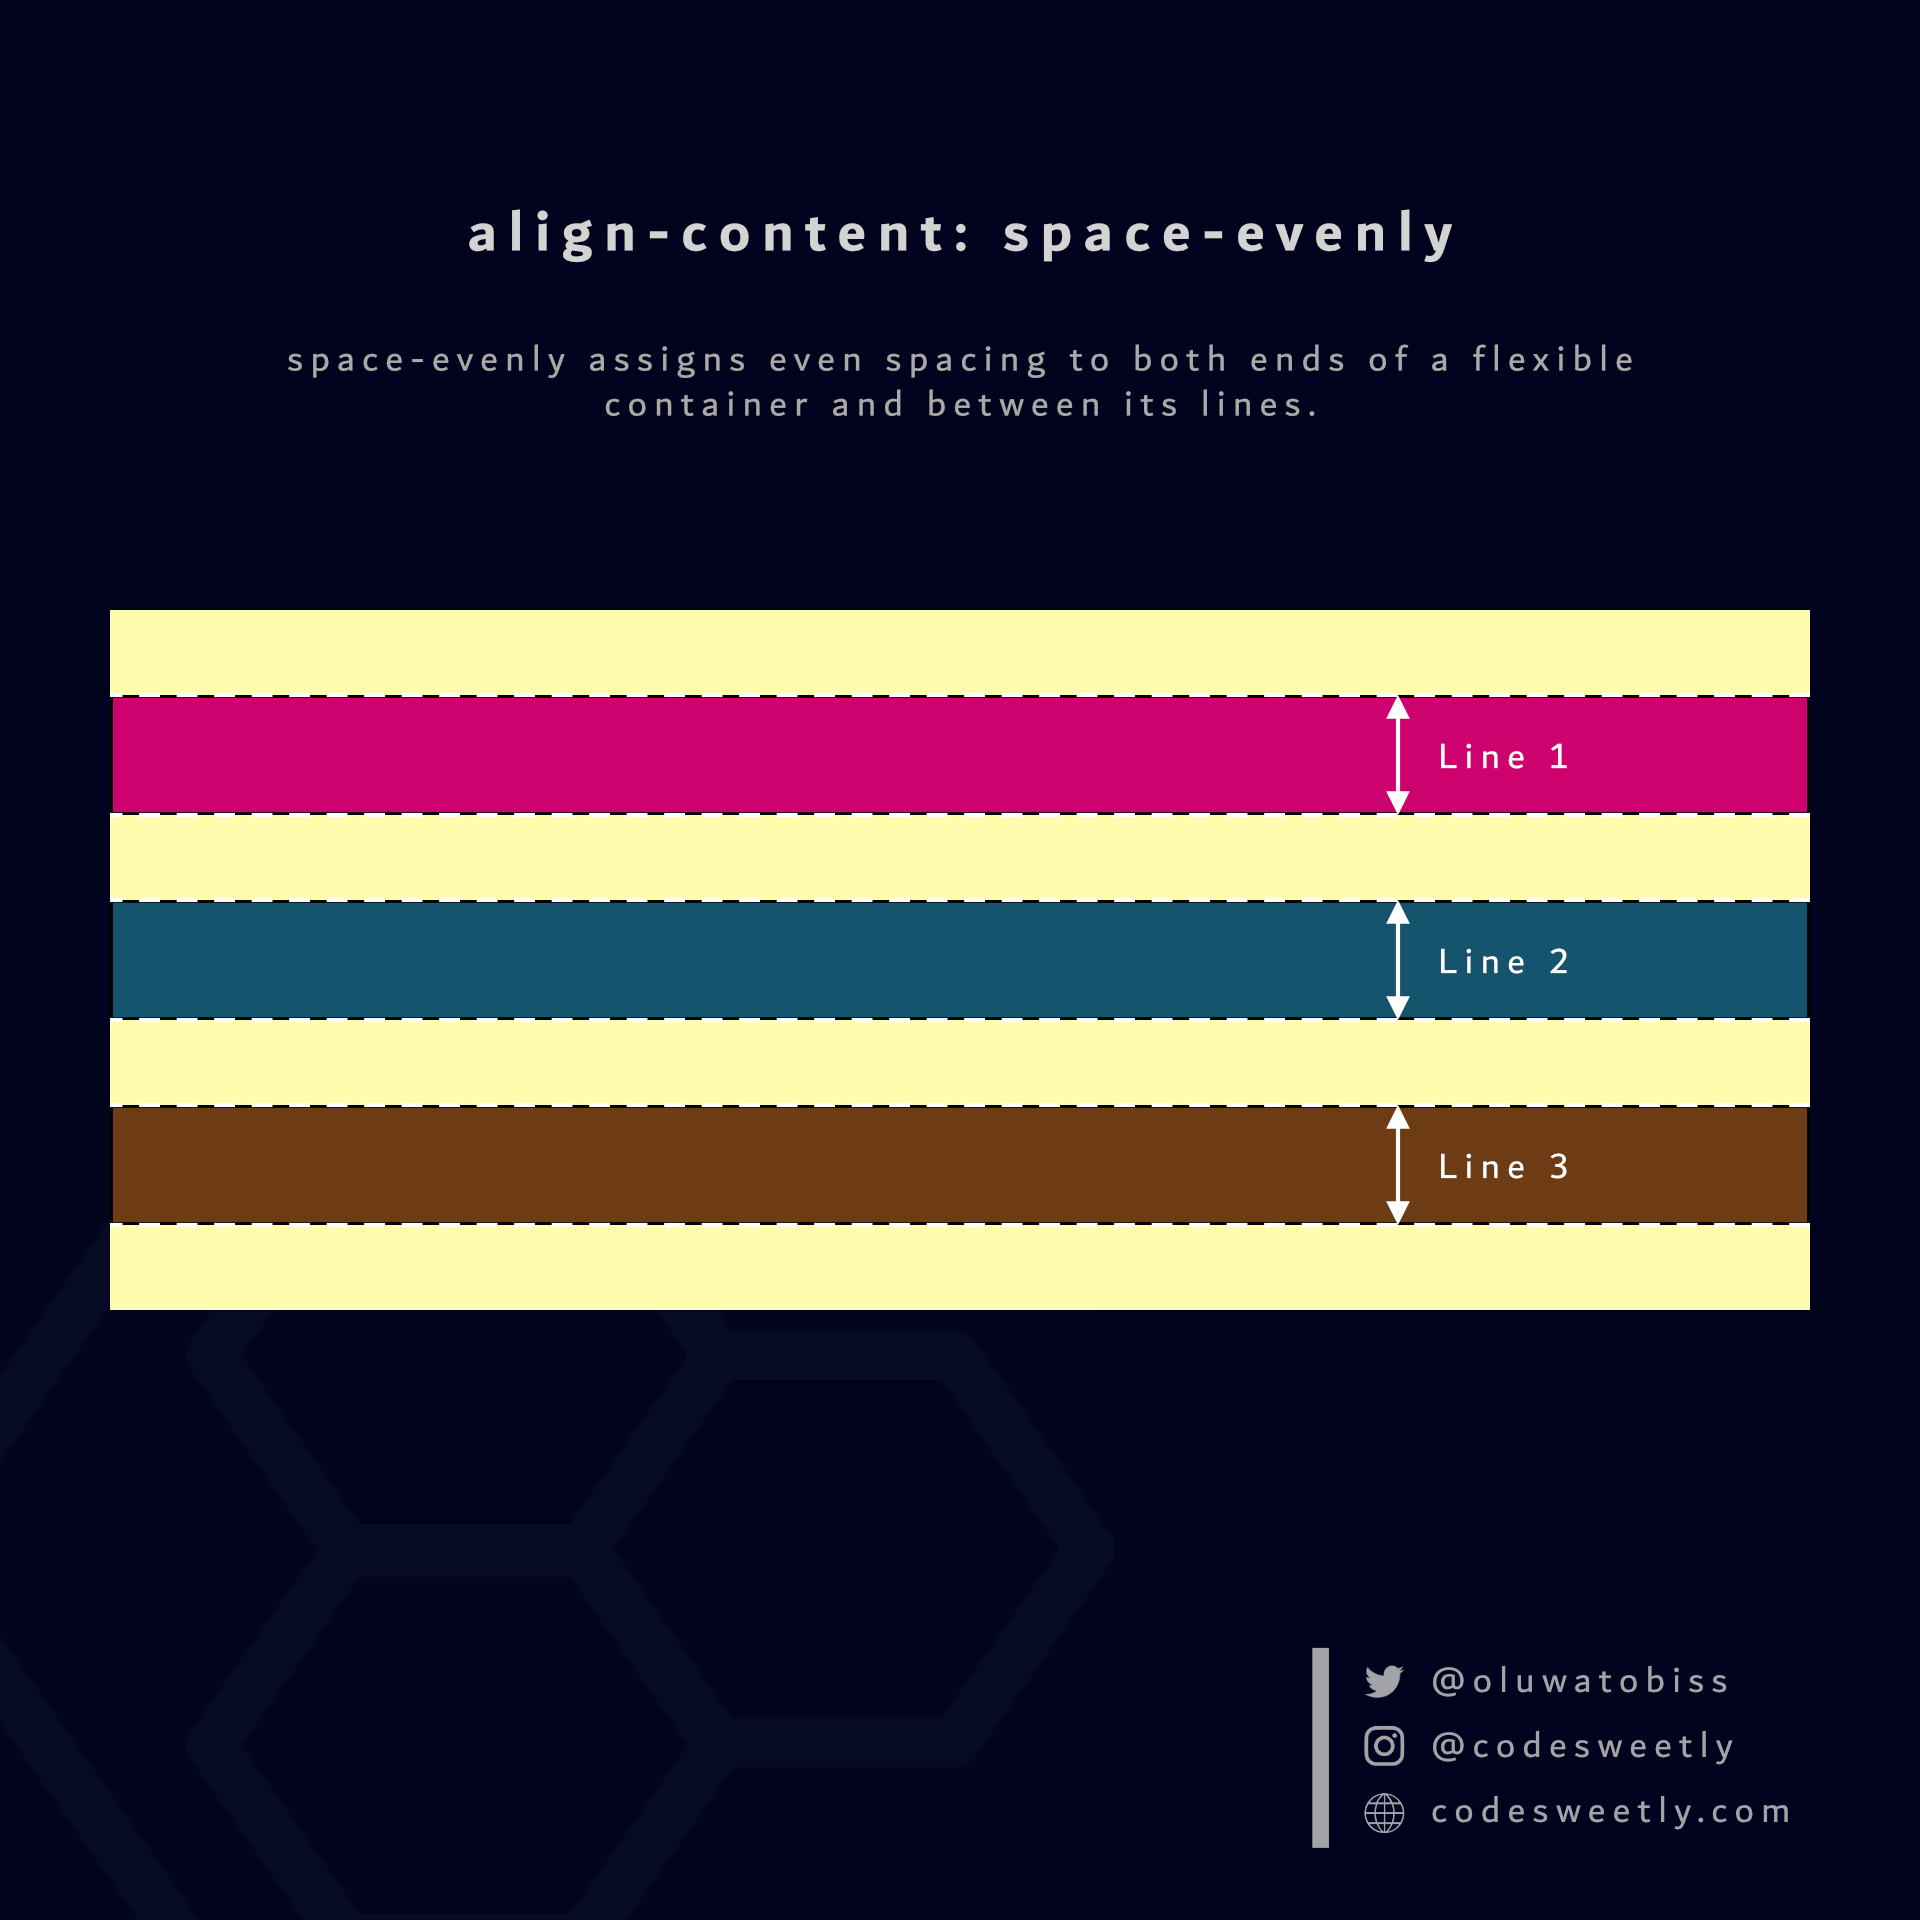 align-content의 space-evenly 값 예시